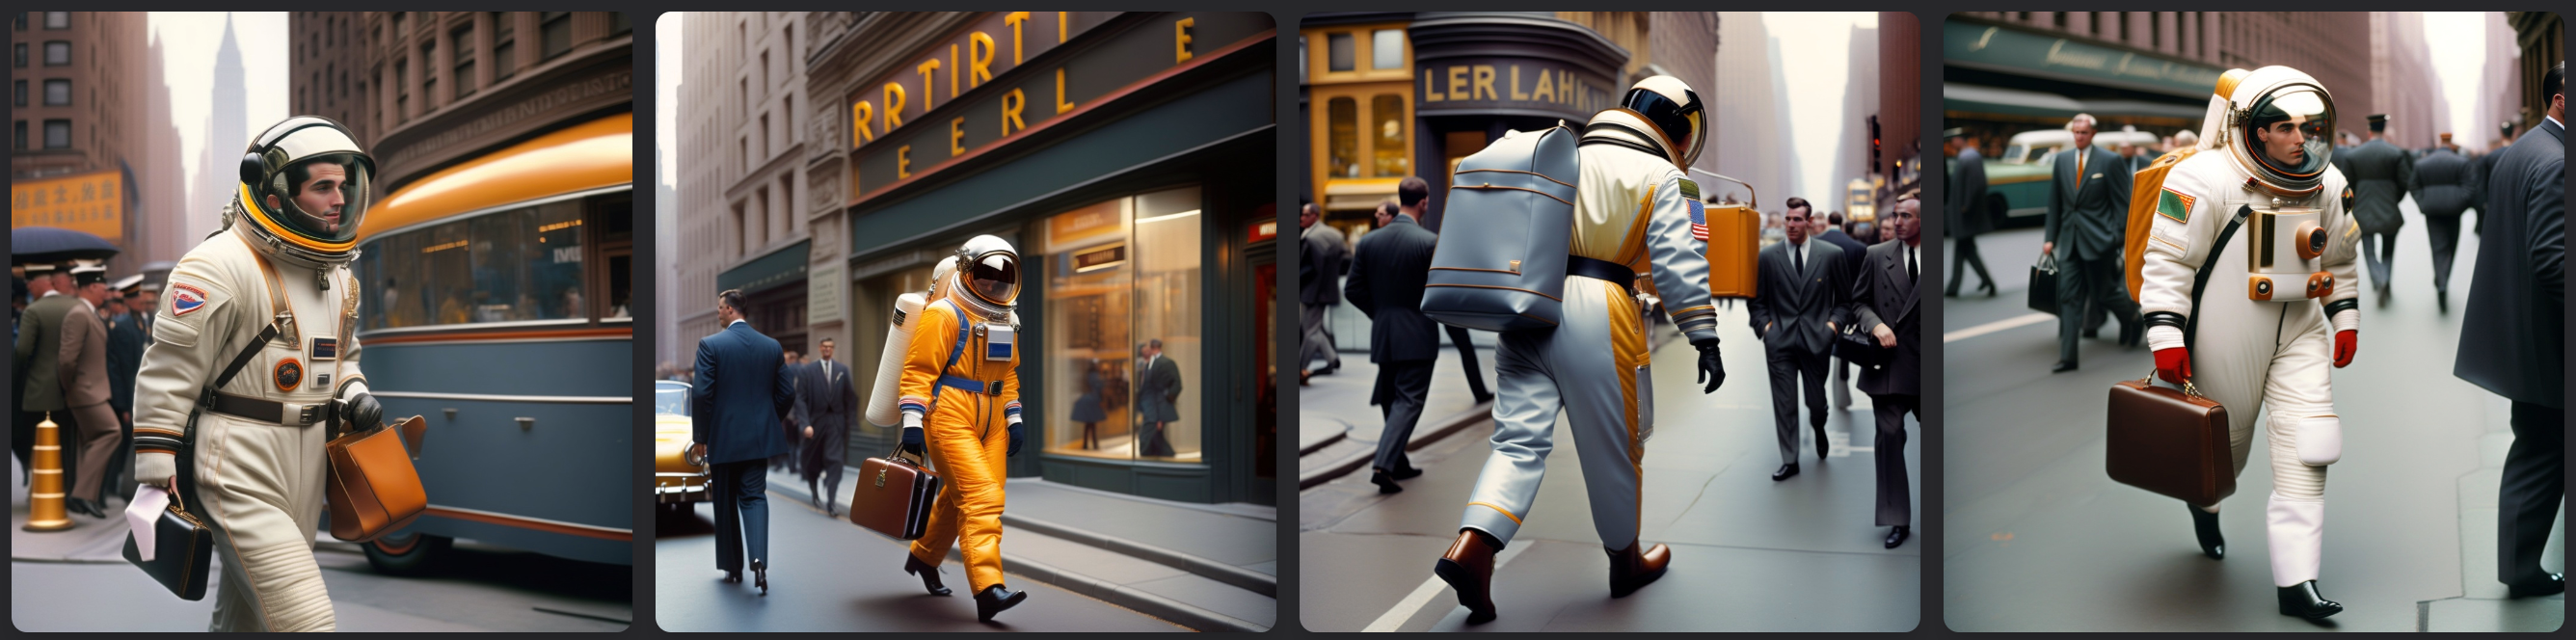 4 images of a brightly coloured astronaut walking around in New York with a briefcase 